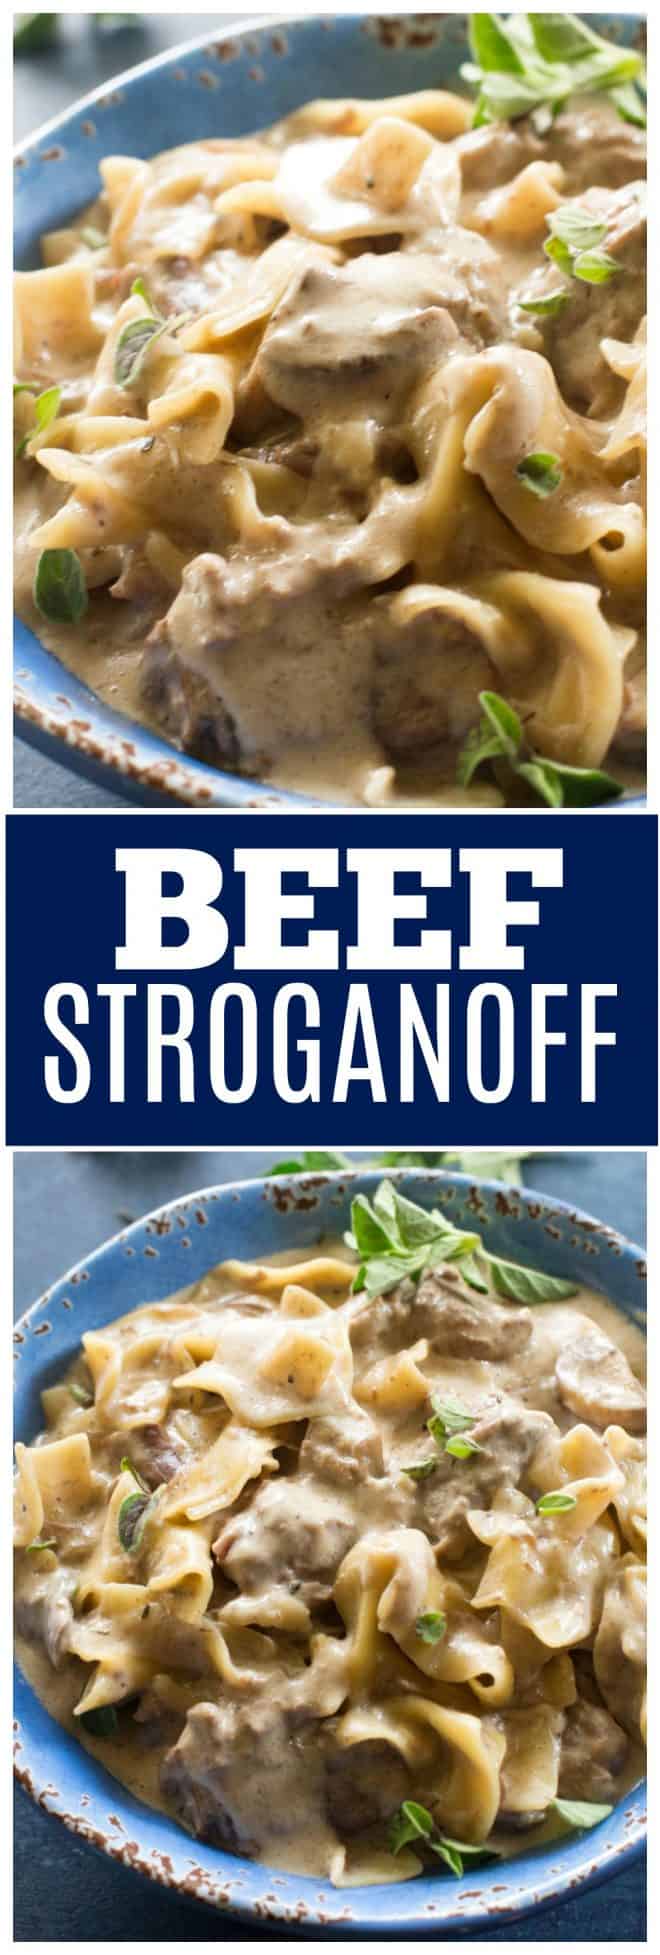 Beef Stroganoff is a creamy beef recipe usually served over buttered egg noodles. This version can be made in the Instant Pot or slow cooker. #beef #stroganoff #recipe #slowcooker #instantpot